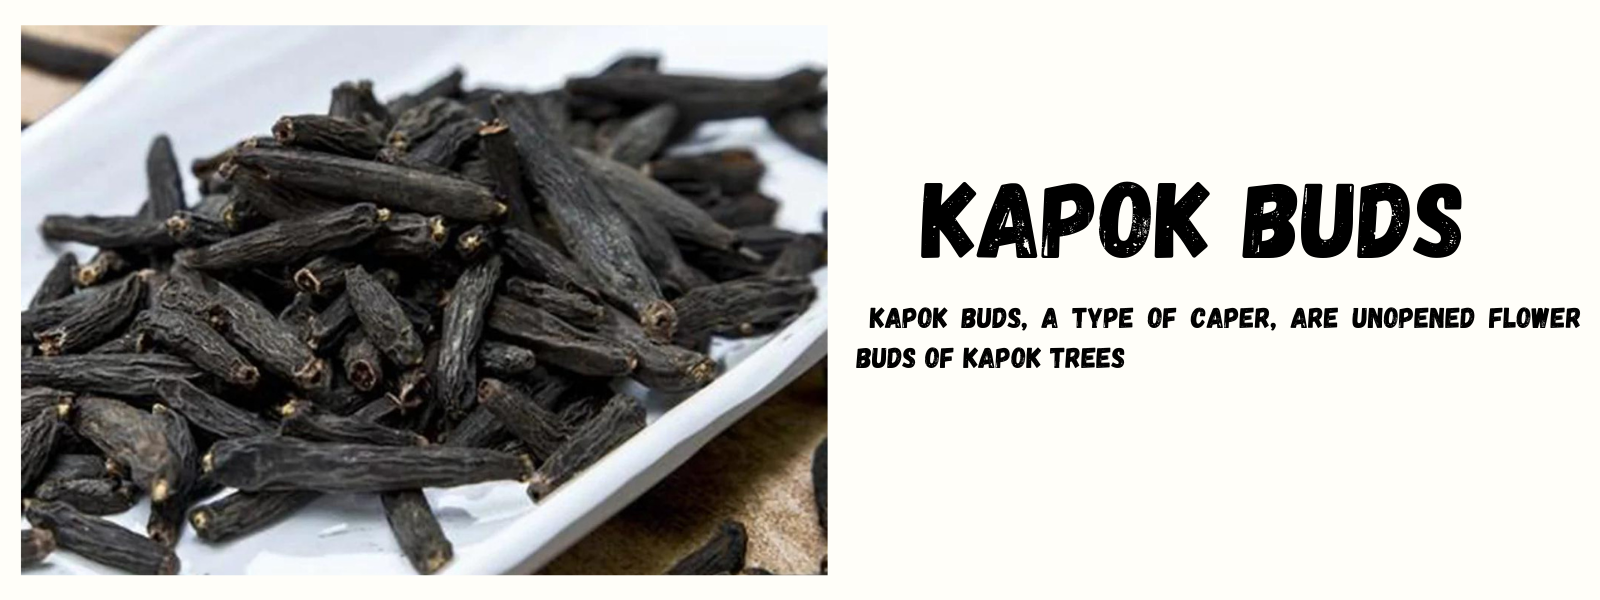 Kapok Buds - Health Benefits, Uses and Important Facts